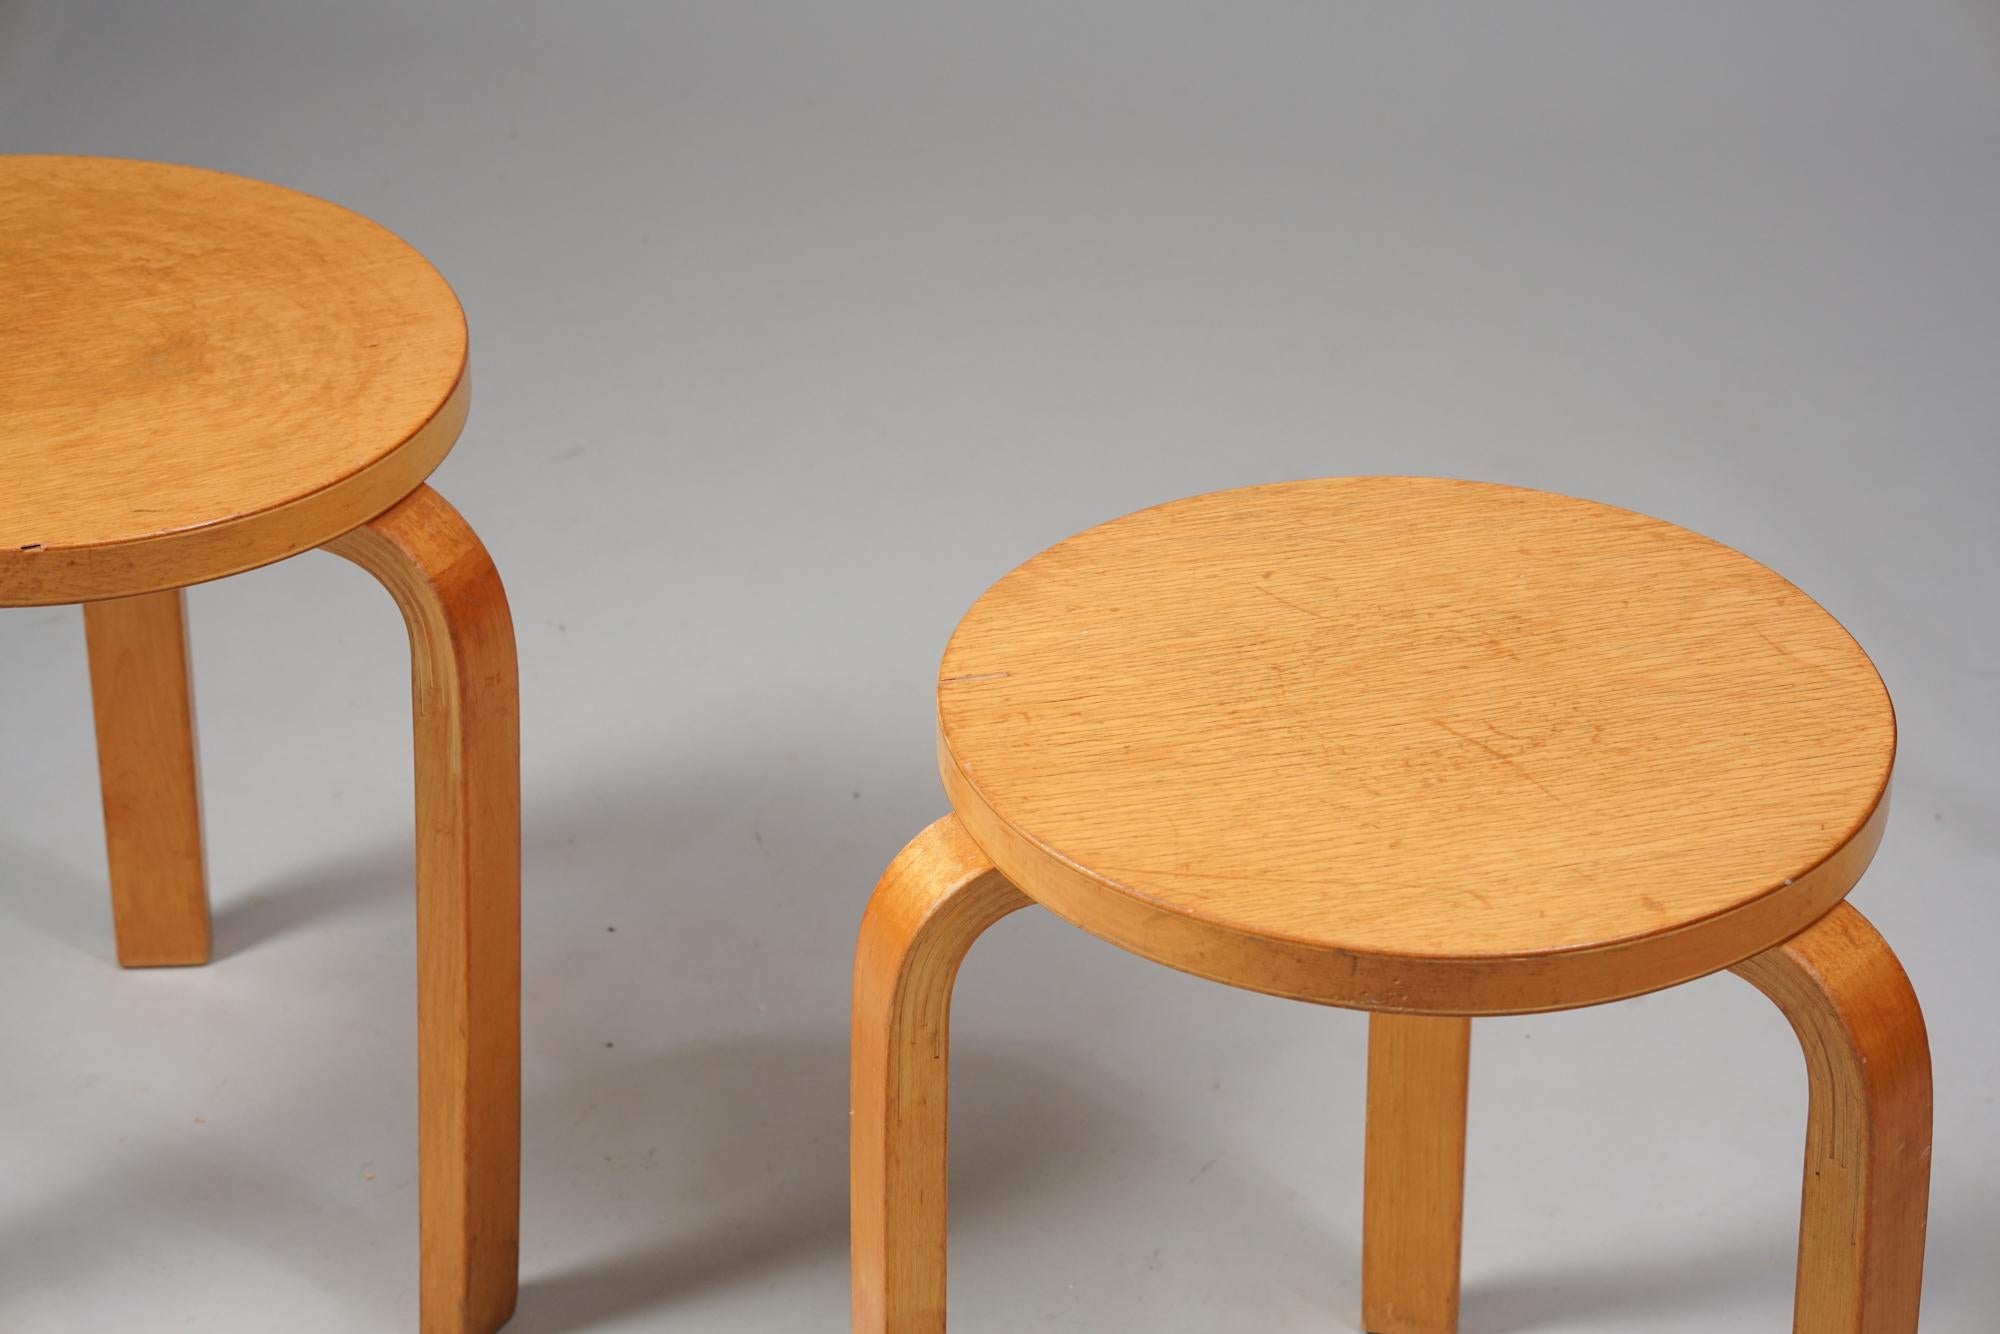 Set of two model 60 stools, design Alvar Aalto for Huonekalu- ja Rakennustyötehdas Oy from the 1930s, Birch. Good vintage condition, patina and wear consistent with age and use. Iconic Alvar Aalto design. Stools are sold as a set.